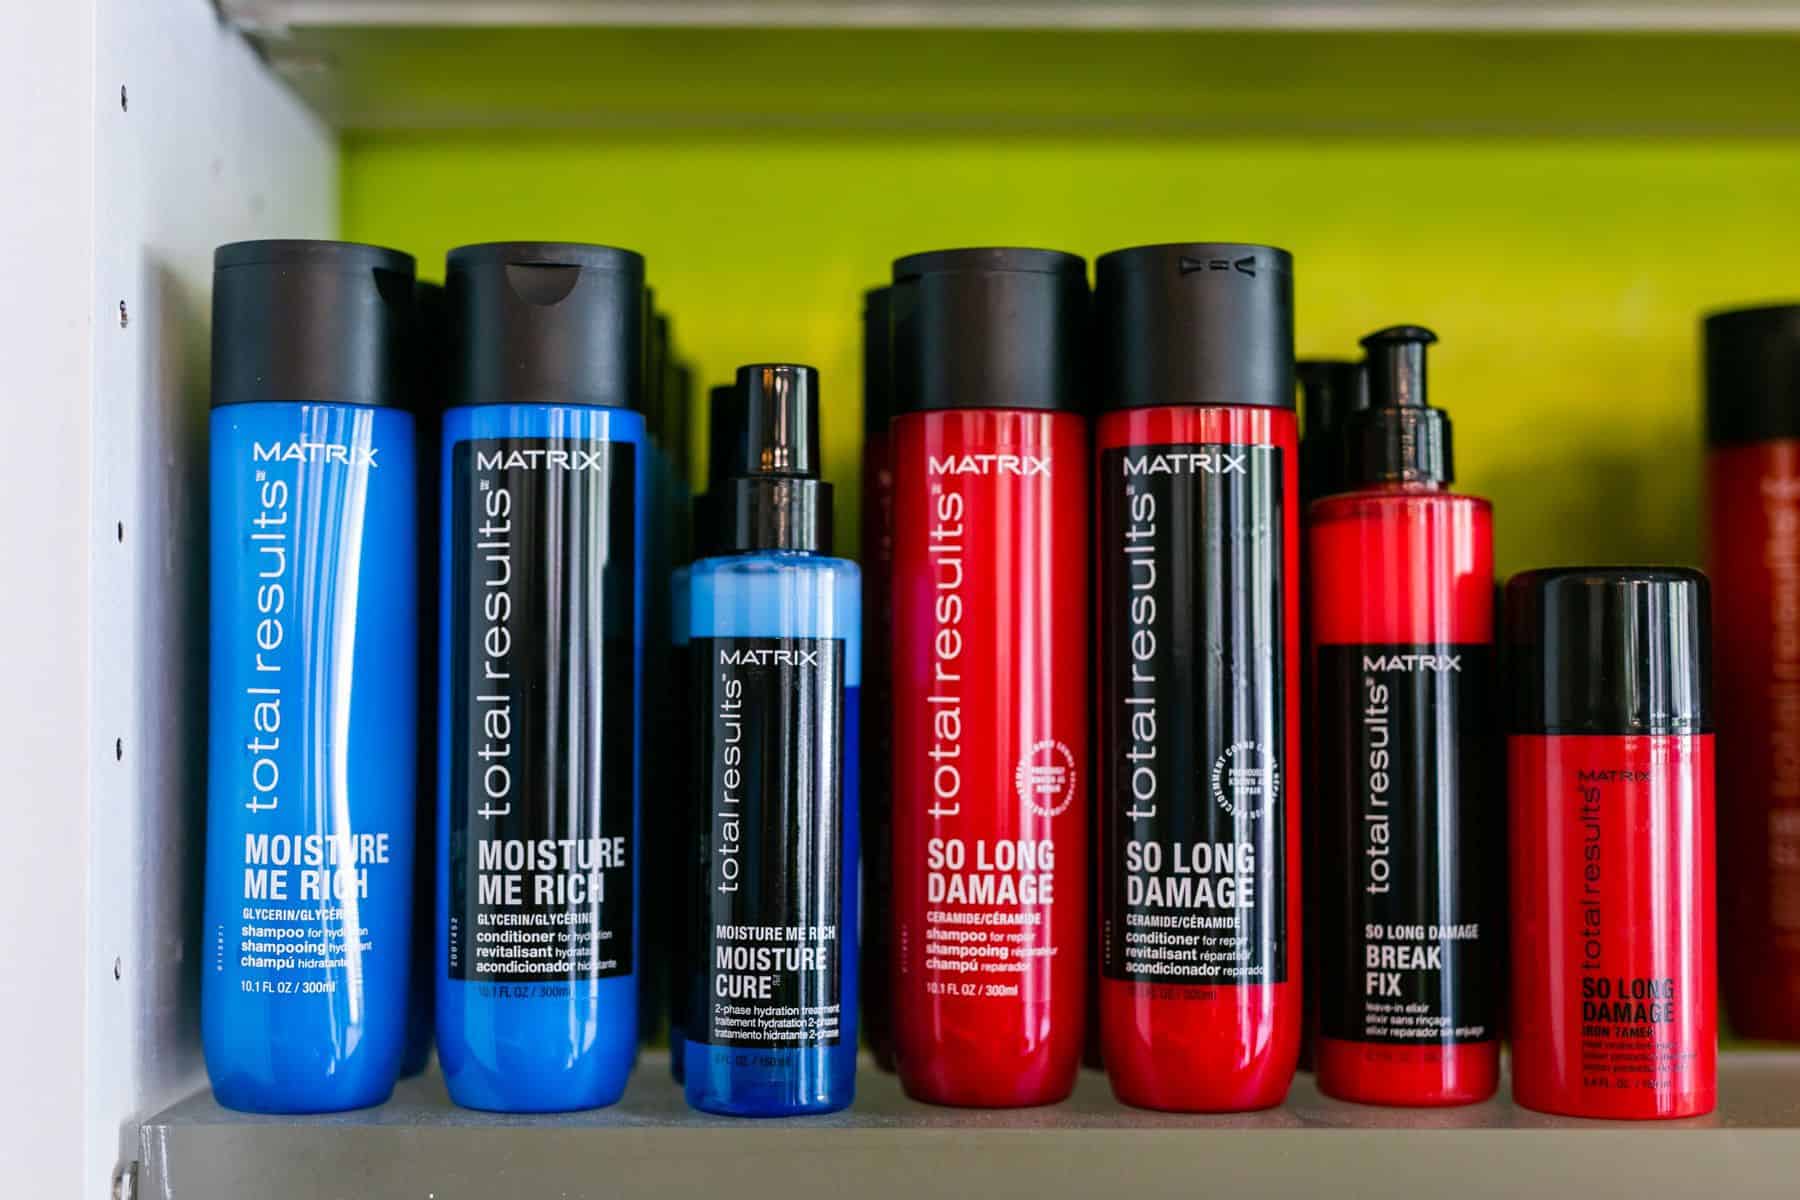 Assorted hair products neatly arranged on a shelf, including shampoos, conditioners, and styling products.